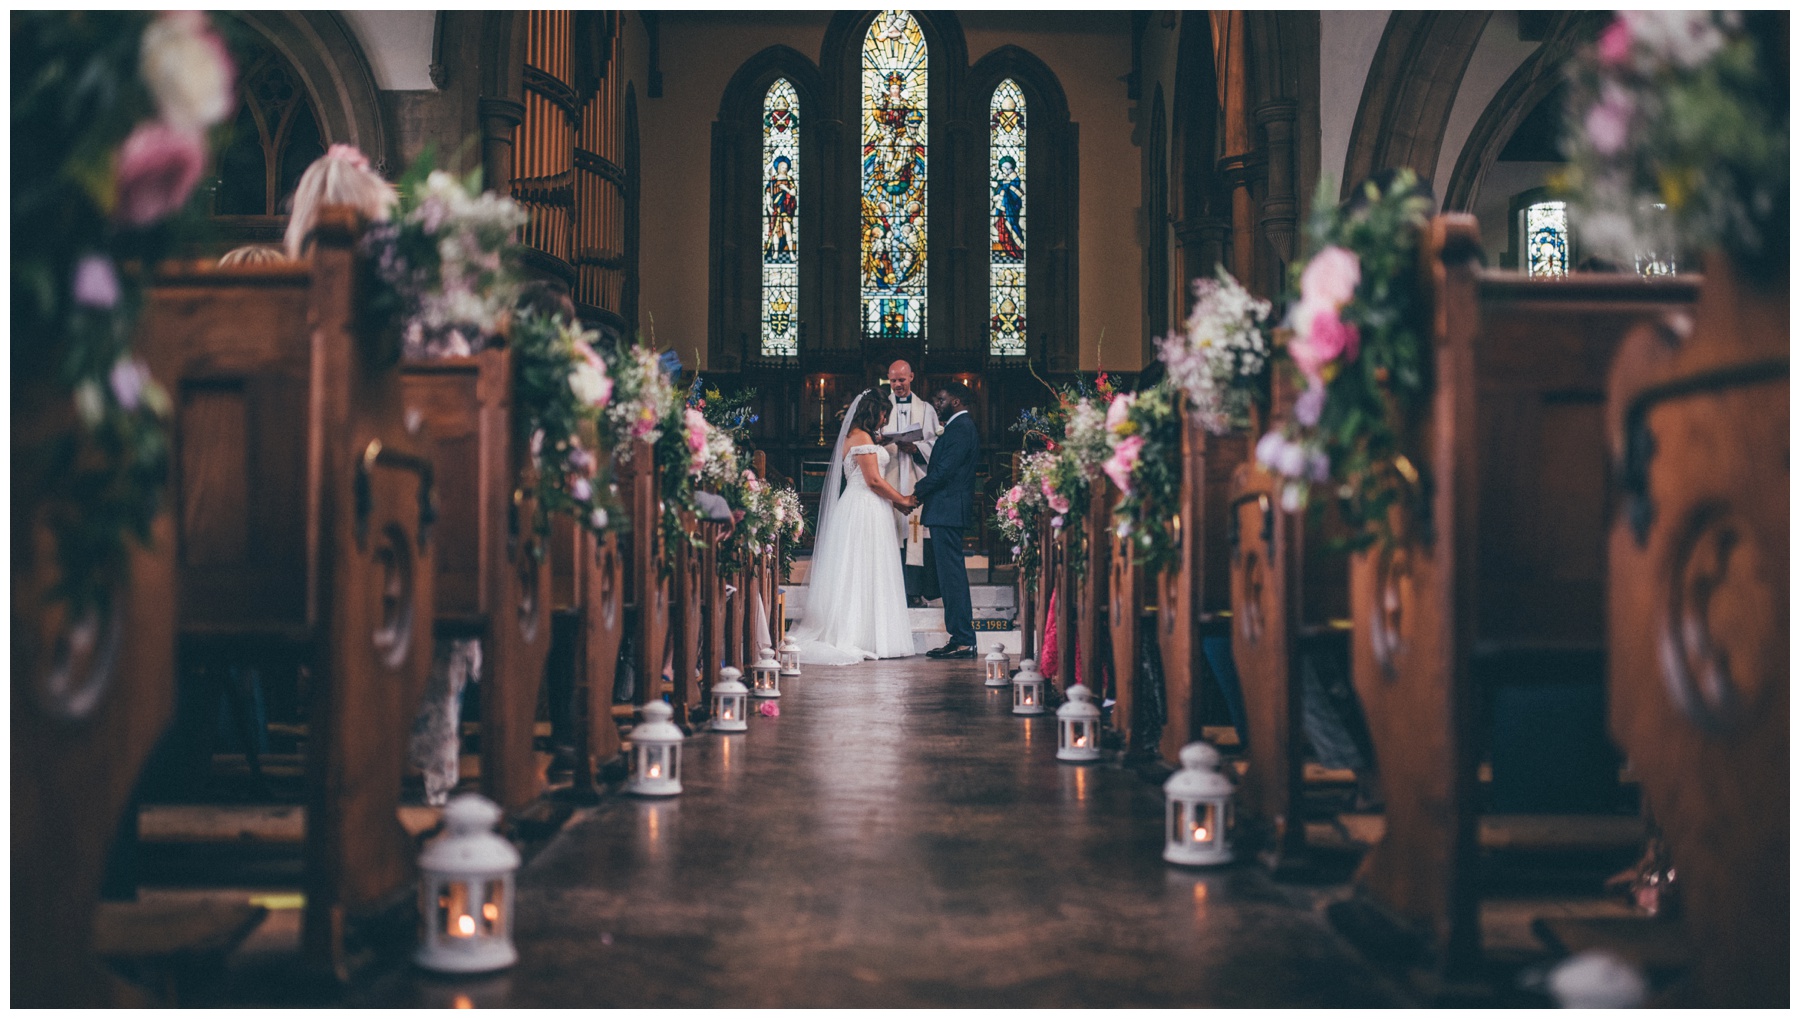 Beautifully flower filled church for a wedding in Essex.